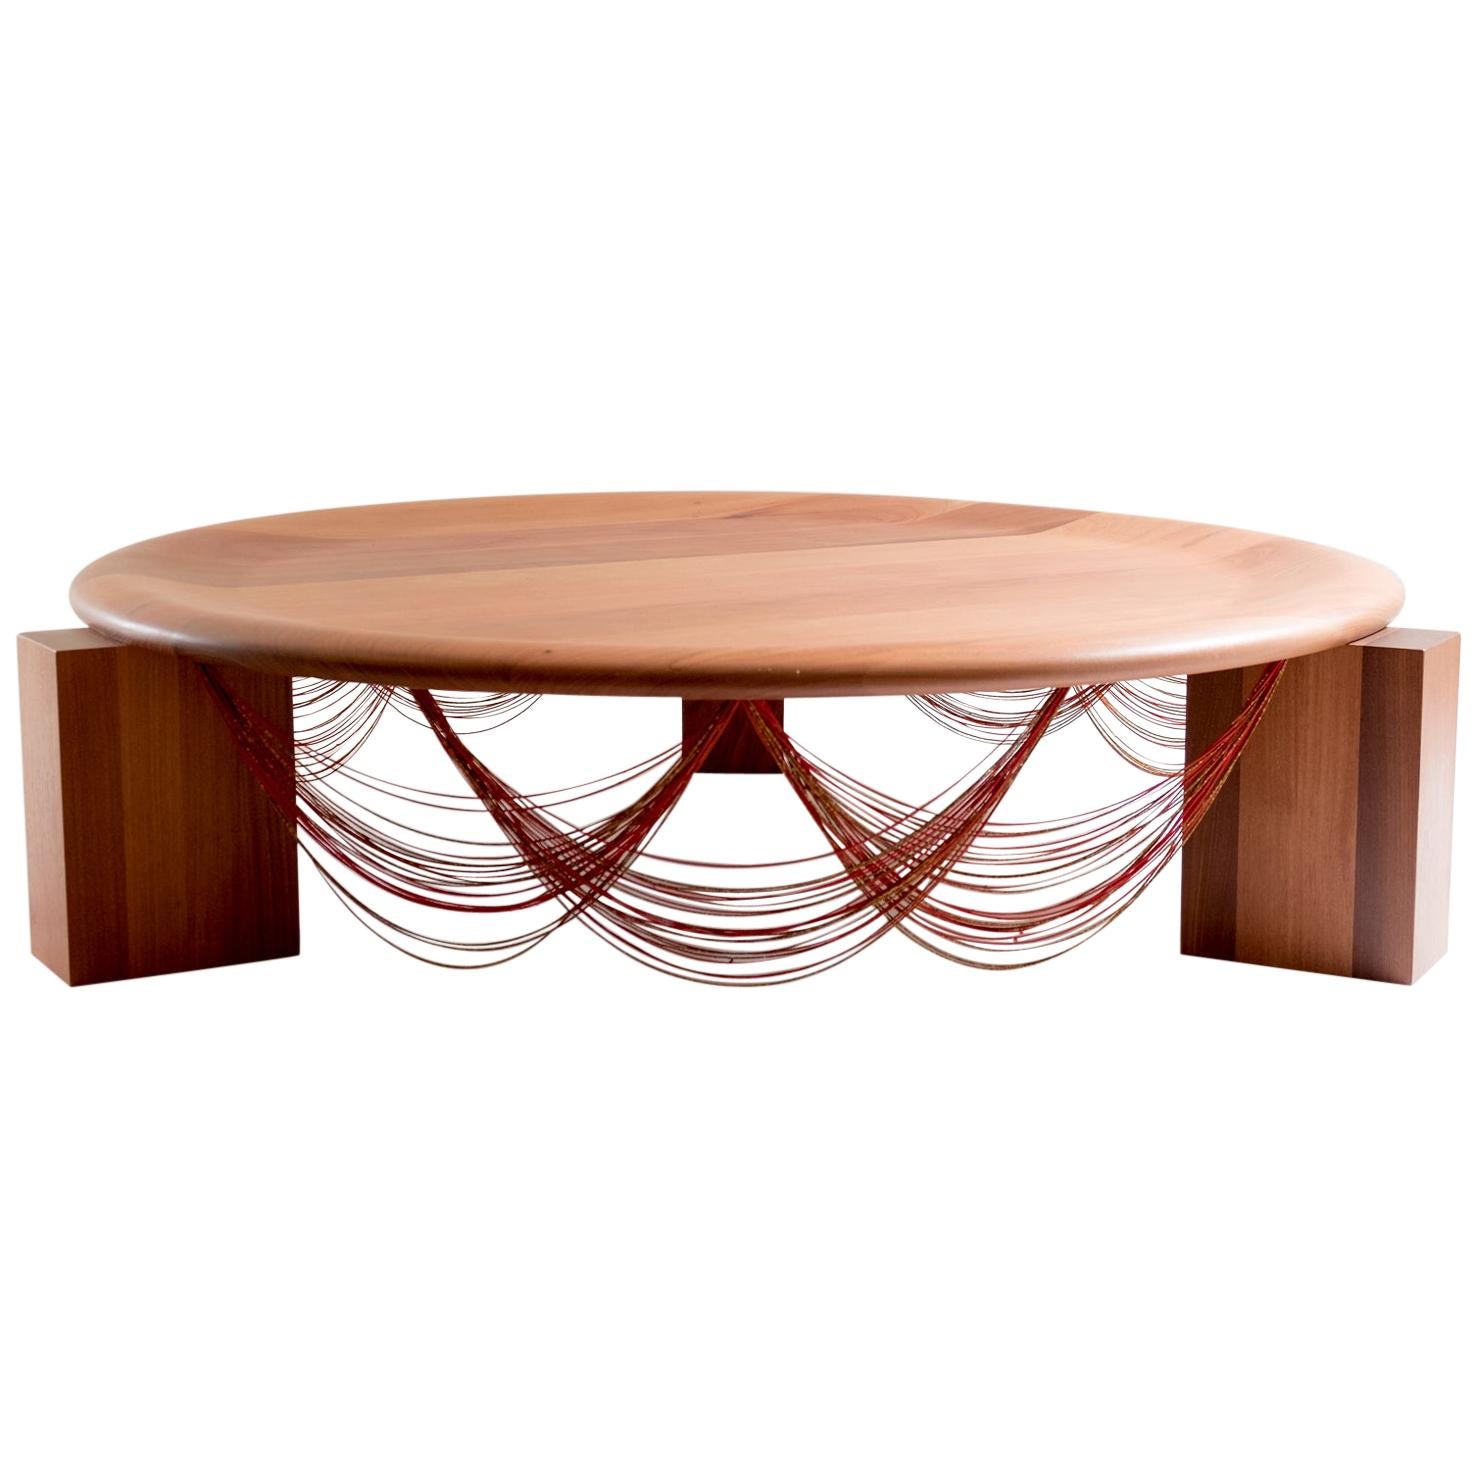 Beiju Center Table from Xingu Collection